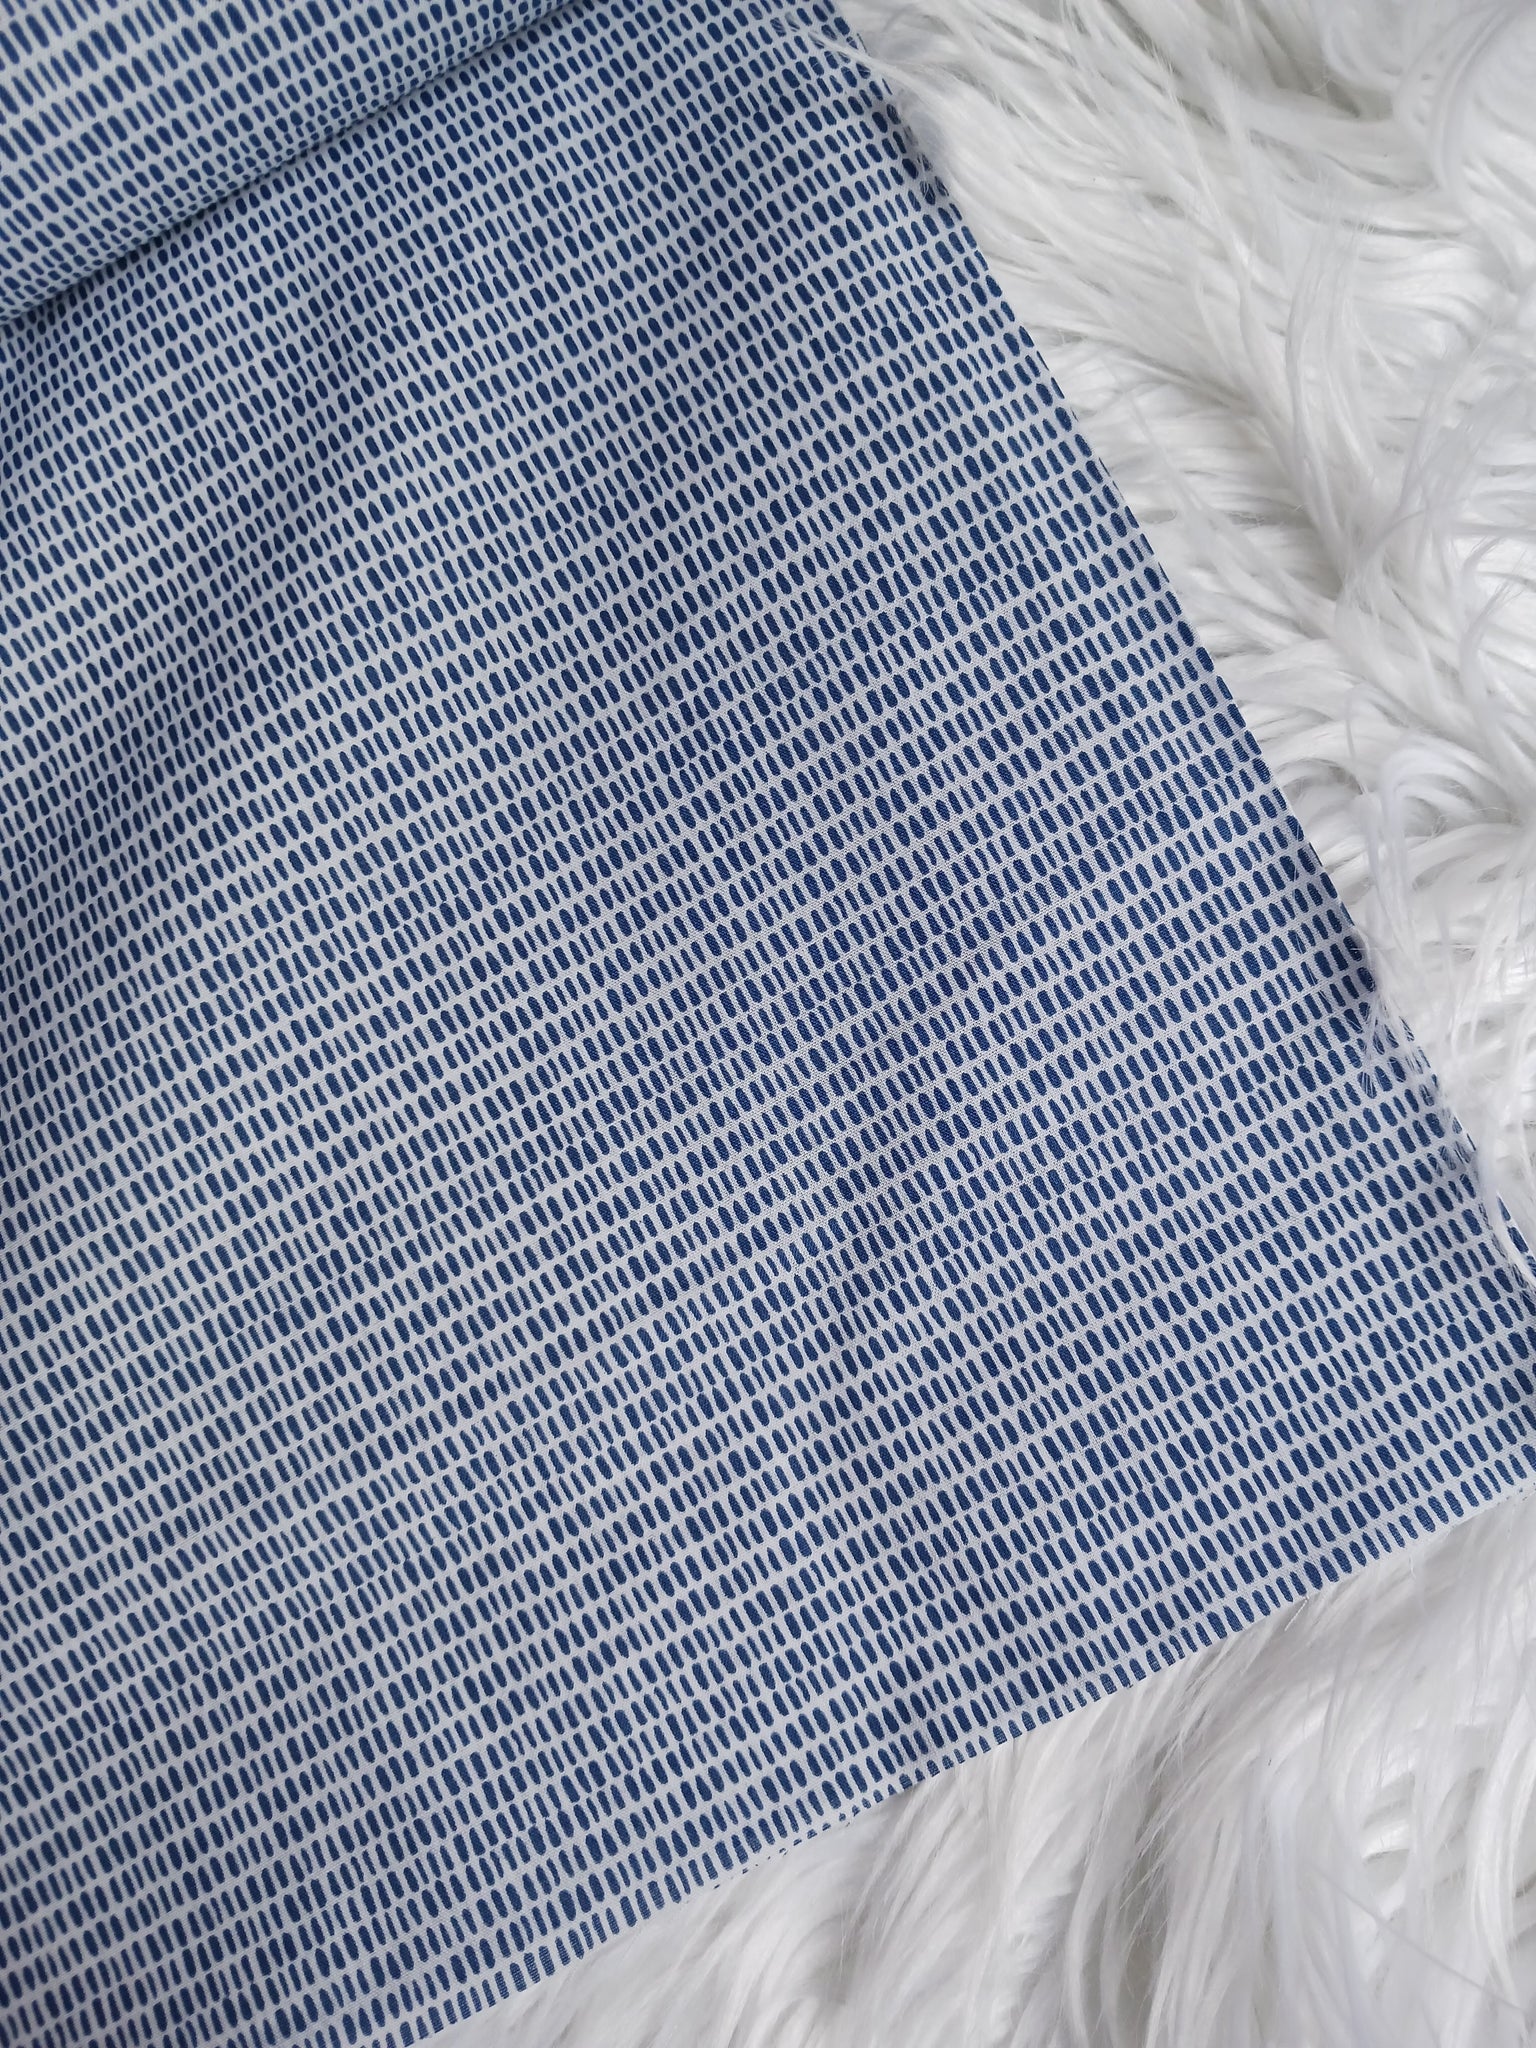 Navy Dashesl Poly Cotton| By the Half Yard